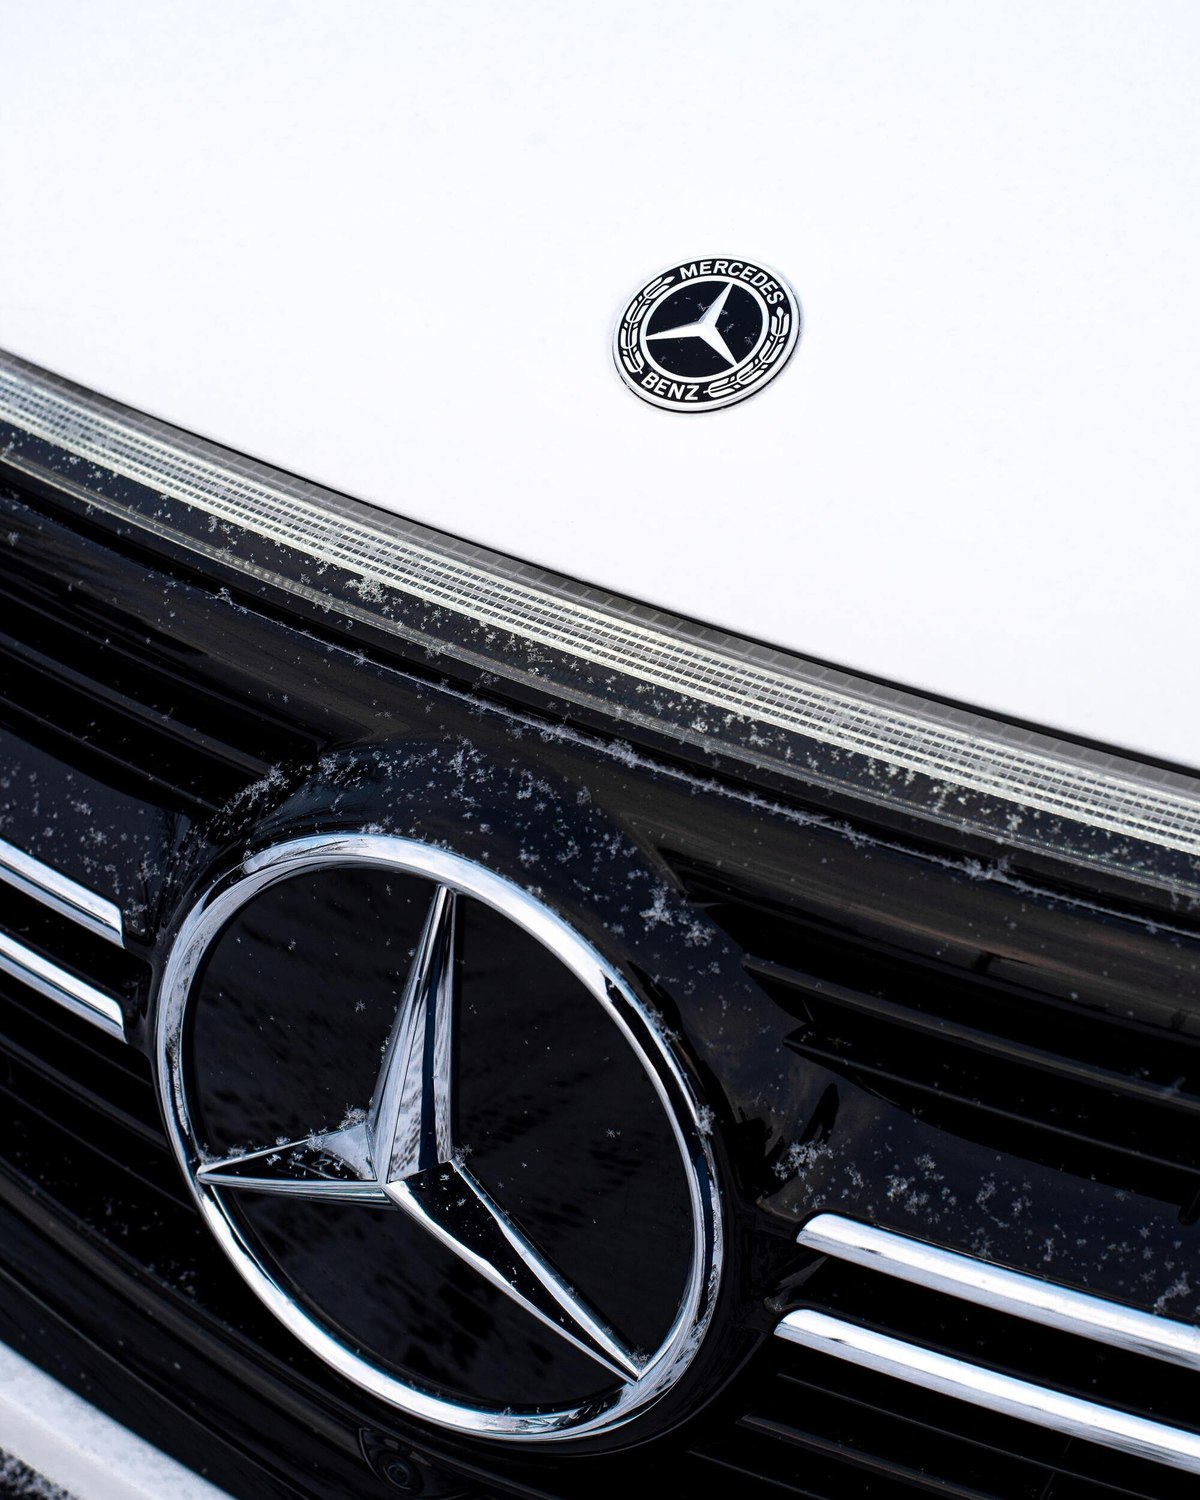 US: Mercedes-Benz gears up for an all-electric future – What do customers think?